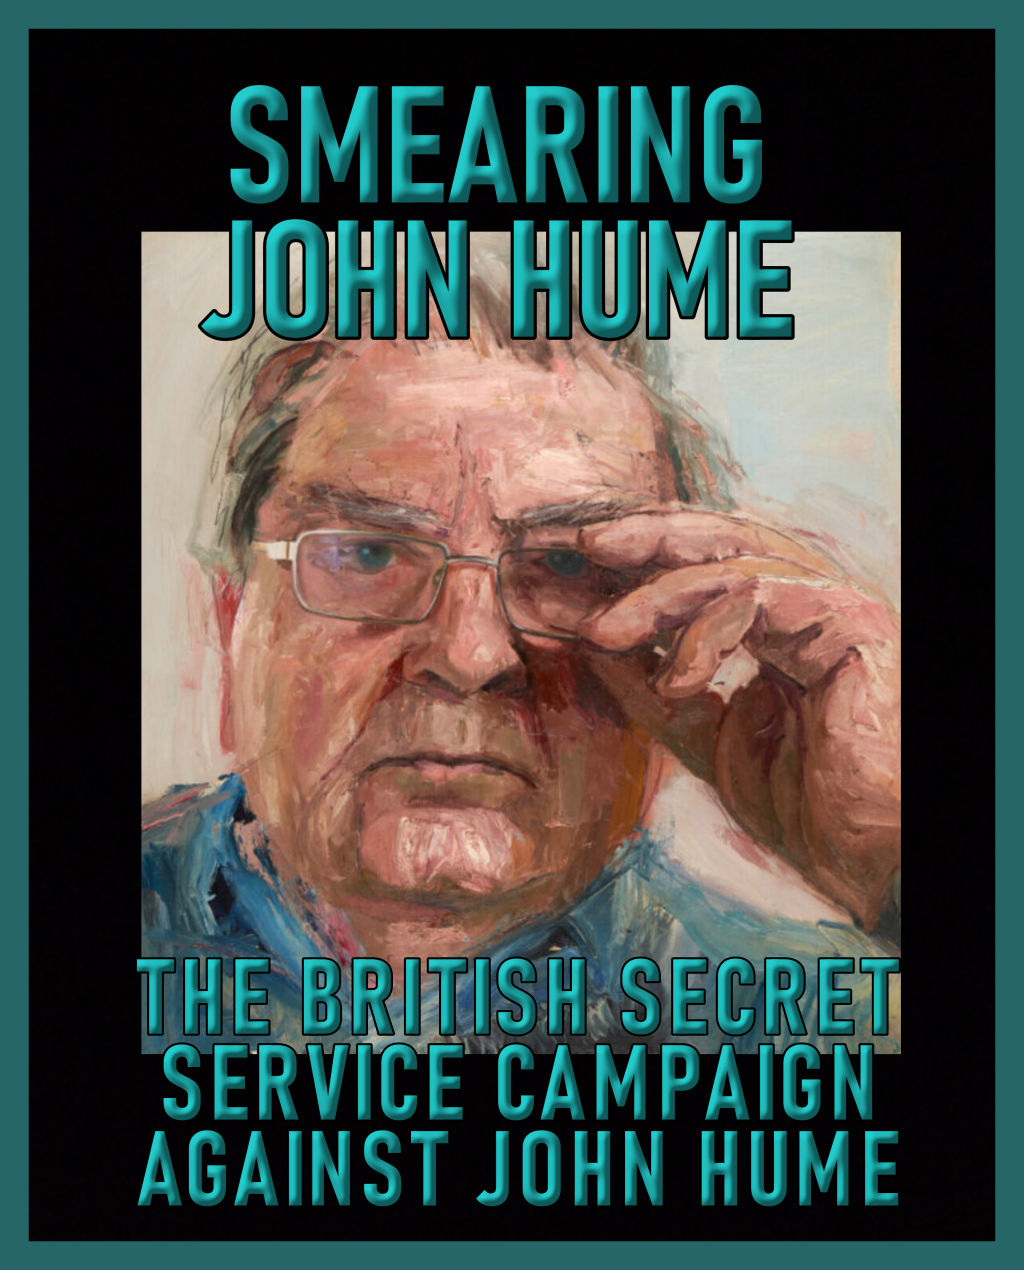 John Hume was the victim of a campaign of character assassination. It was perpetrated by the British Secret Service, MI6, and their colleagues in the IRD, a dirty tricks department of the Foreign Office. Hume was also placed under MI5 surveillance in Dublin with the assistance of the Gardaí.